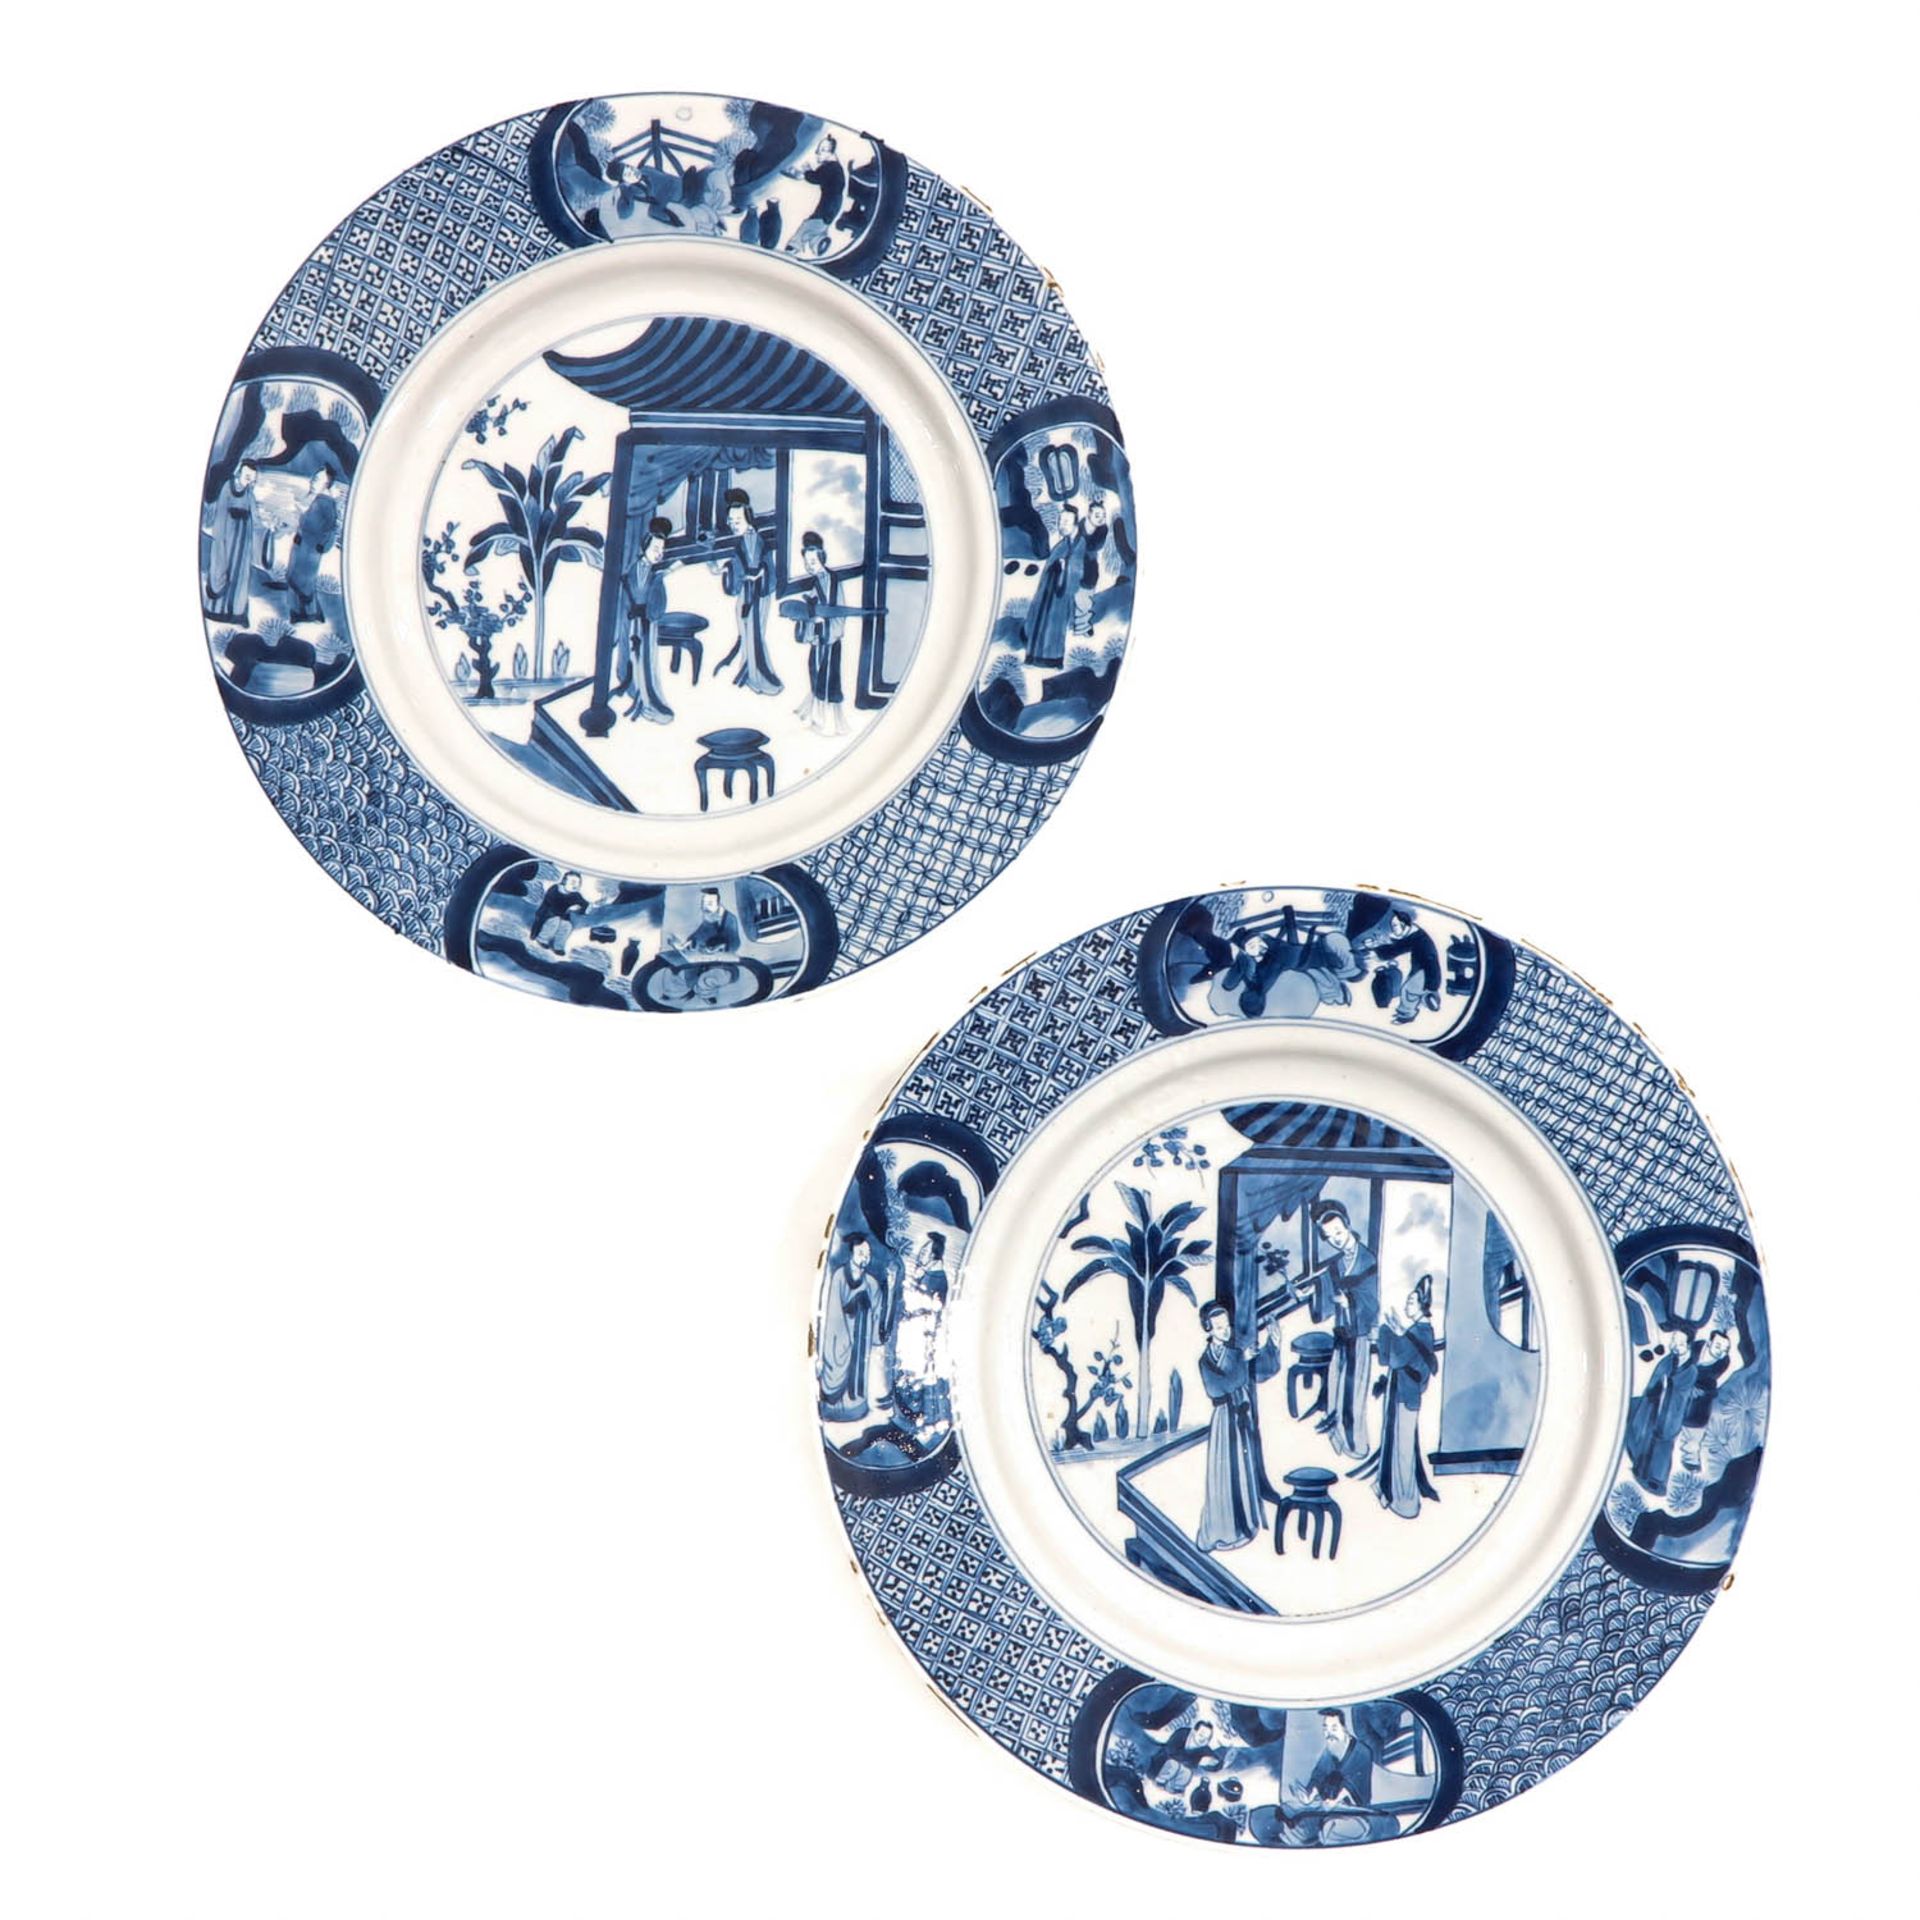 A Series of 5 Blue and White Plates - Image 5 of 10